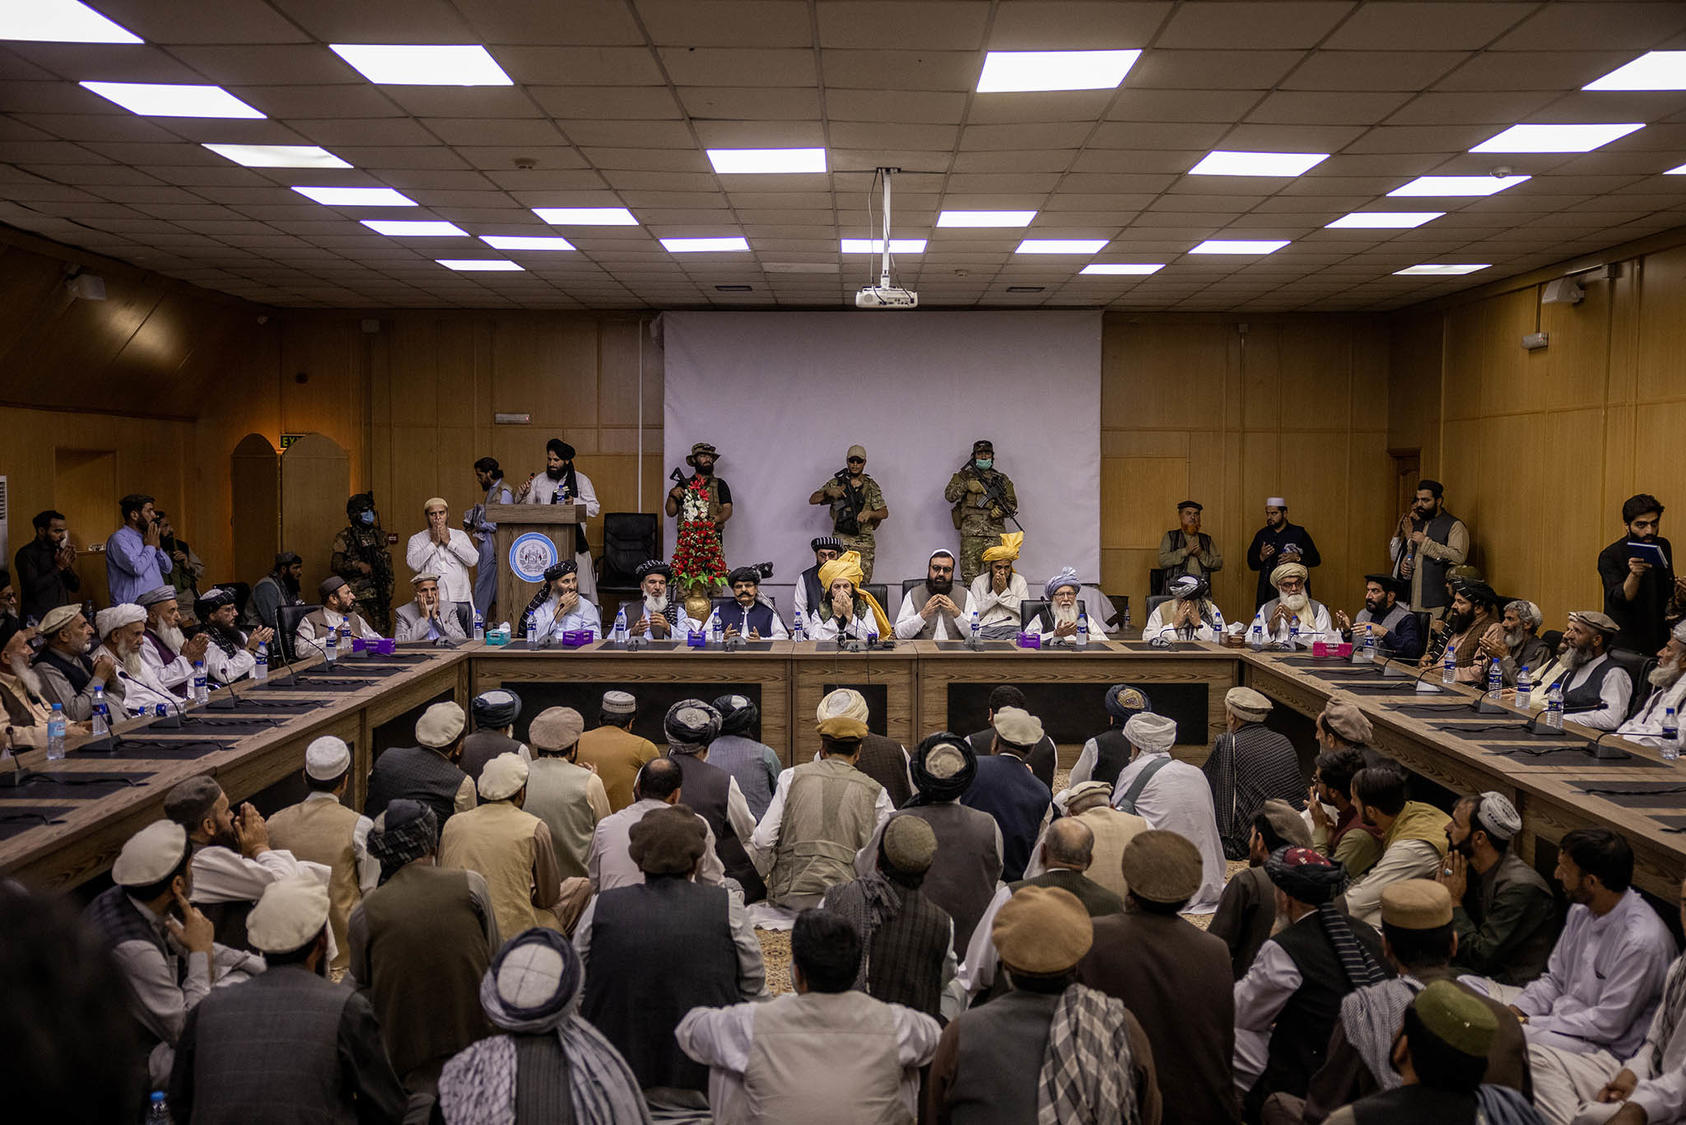 Khalil Haqqani, the current interim minister for refugees of the Taliban's government, center, leads a gathering of tribal elders in Kabul, Afghanistan on Aug. 26, 2021. (Jim Huylebroek/The New York Times)